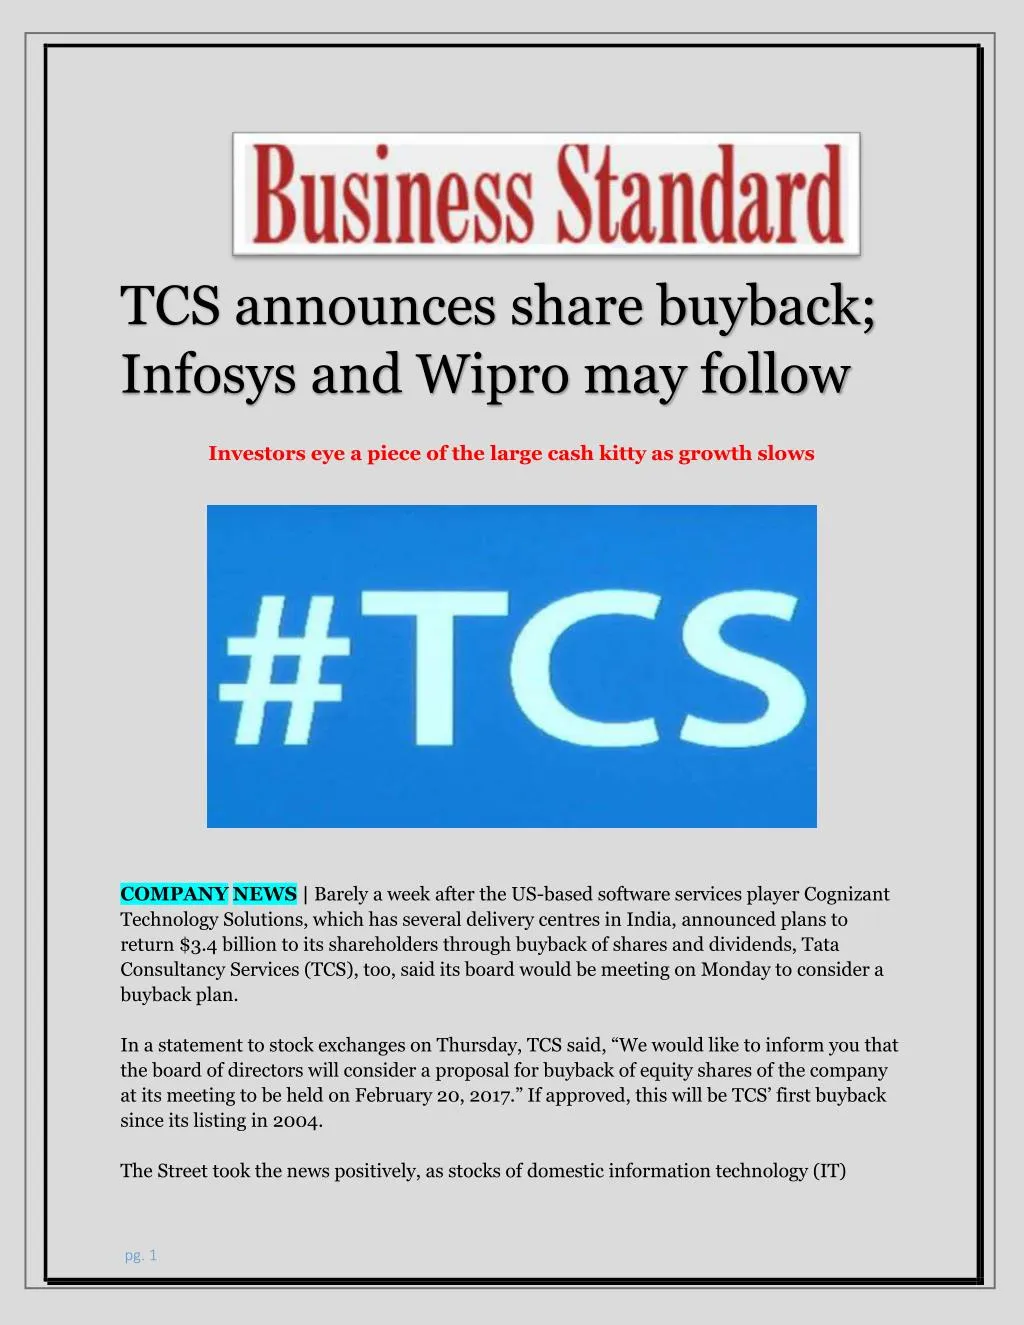 tcs announces share buyback infosys and wipro